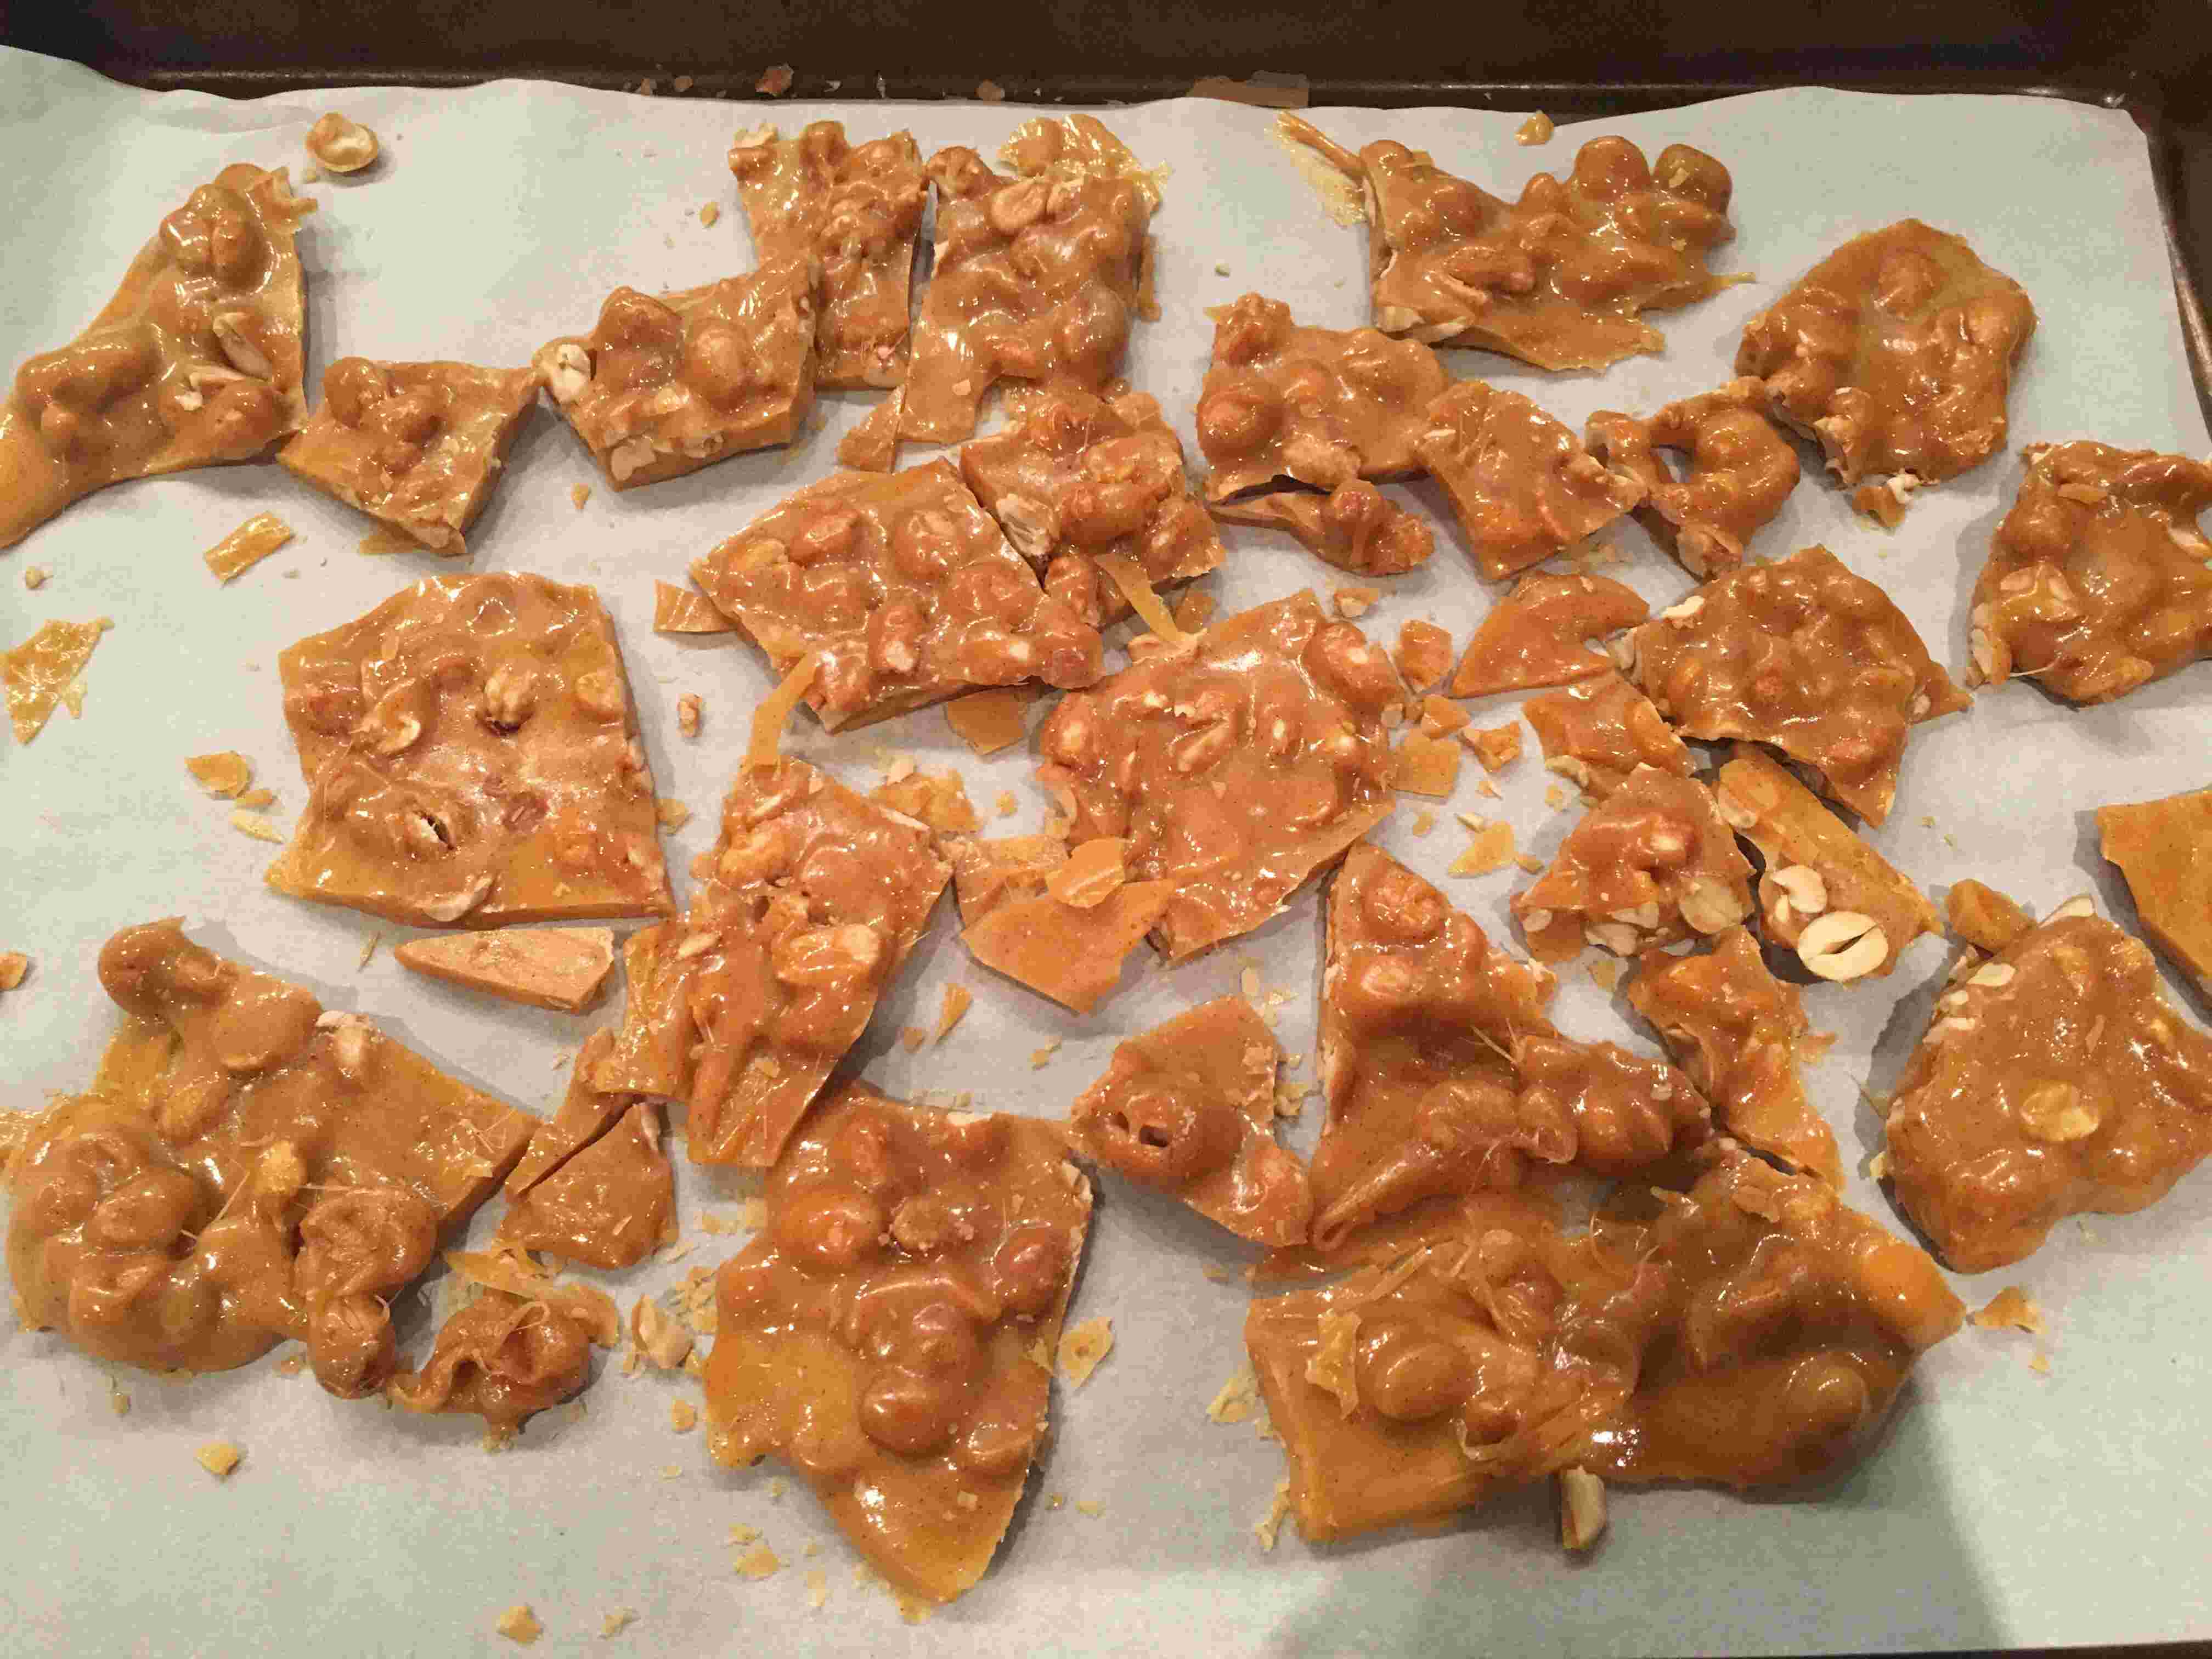 Once brittle has cooled, break it up into pieces. Save half the brittle for snacking, then pulverize the other half with peanut butter to create that crackly, slightly crunchy filling